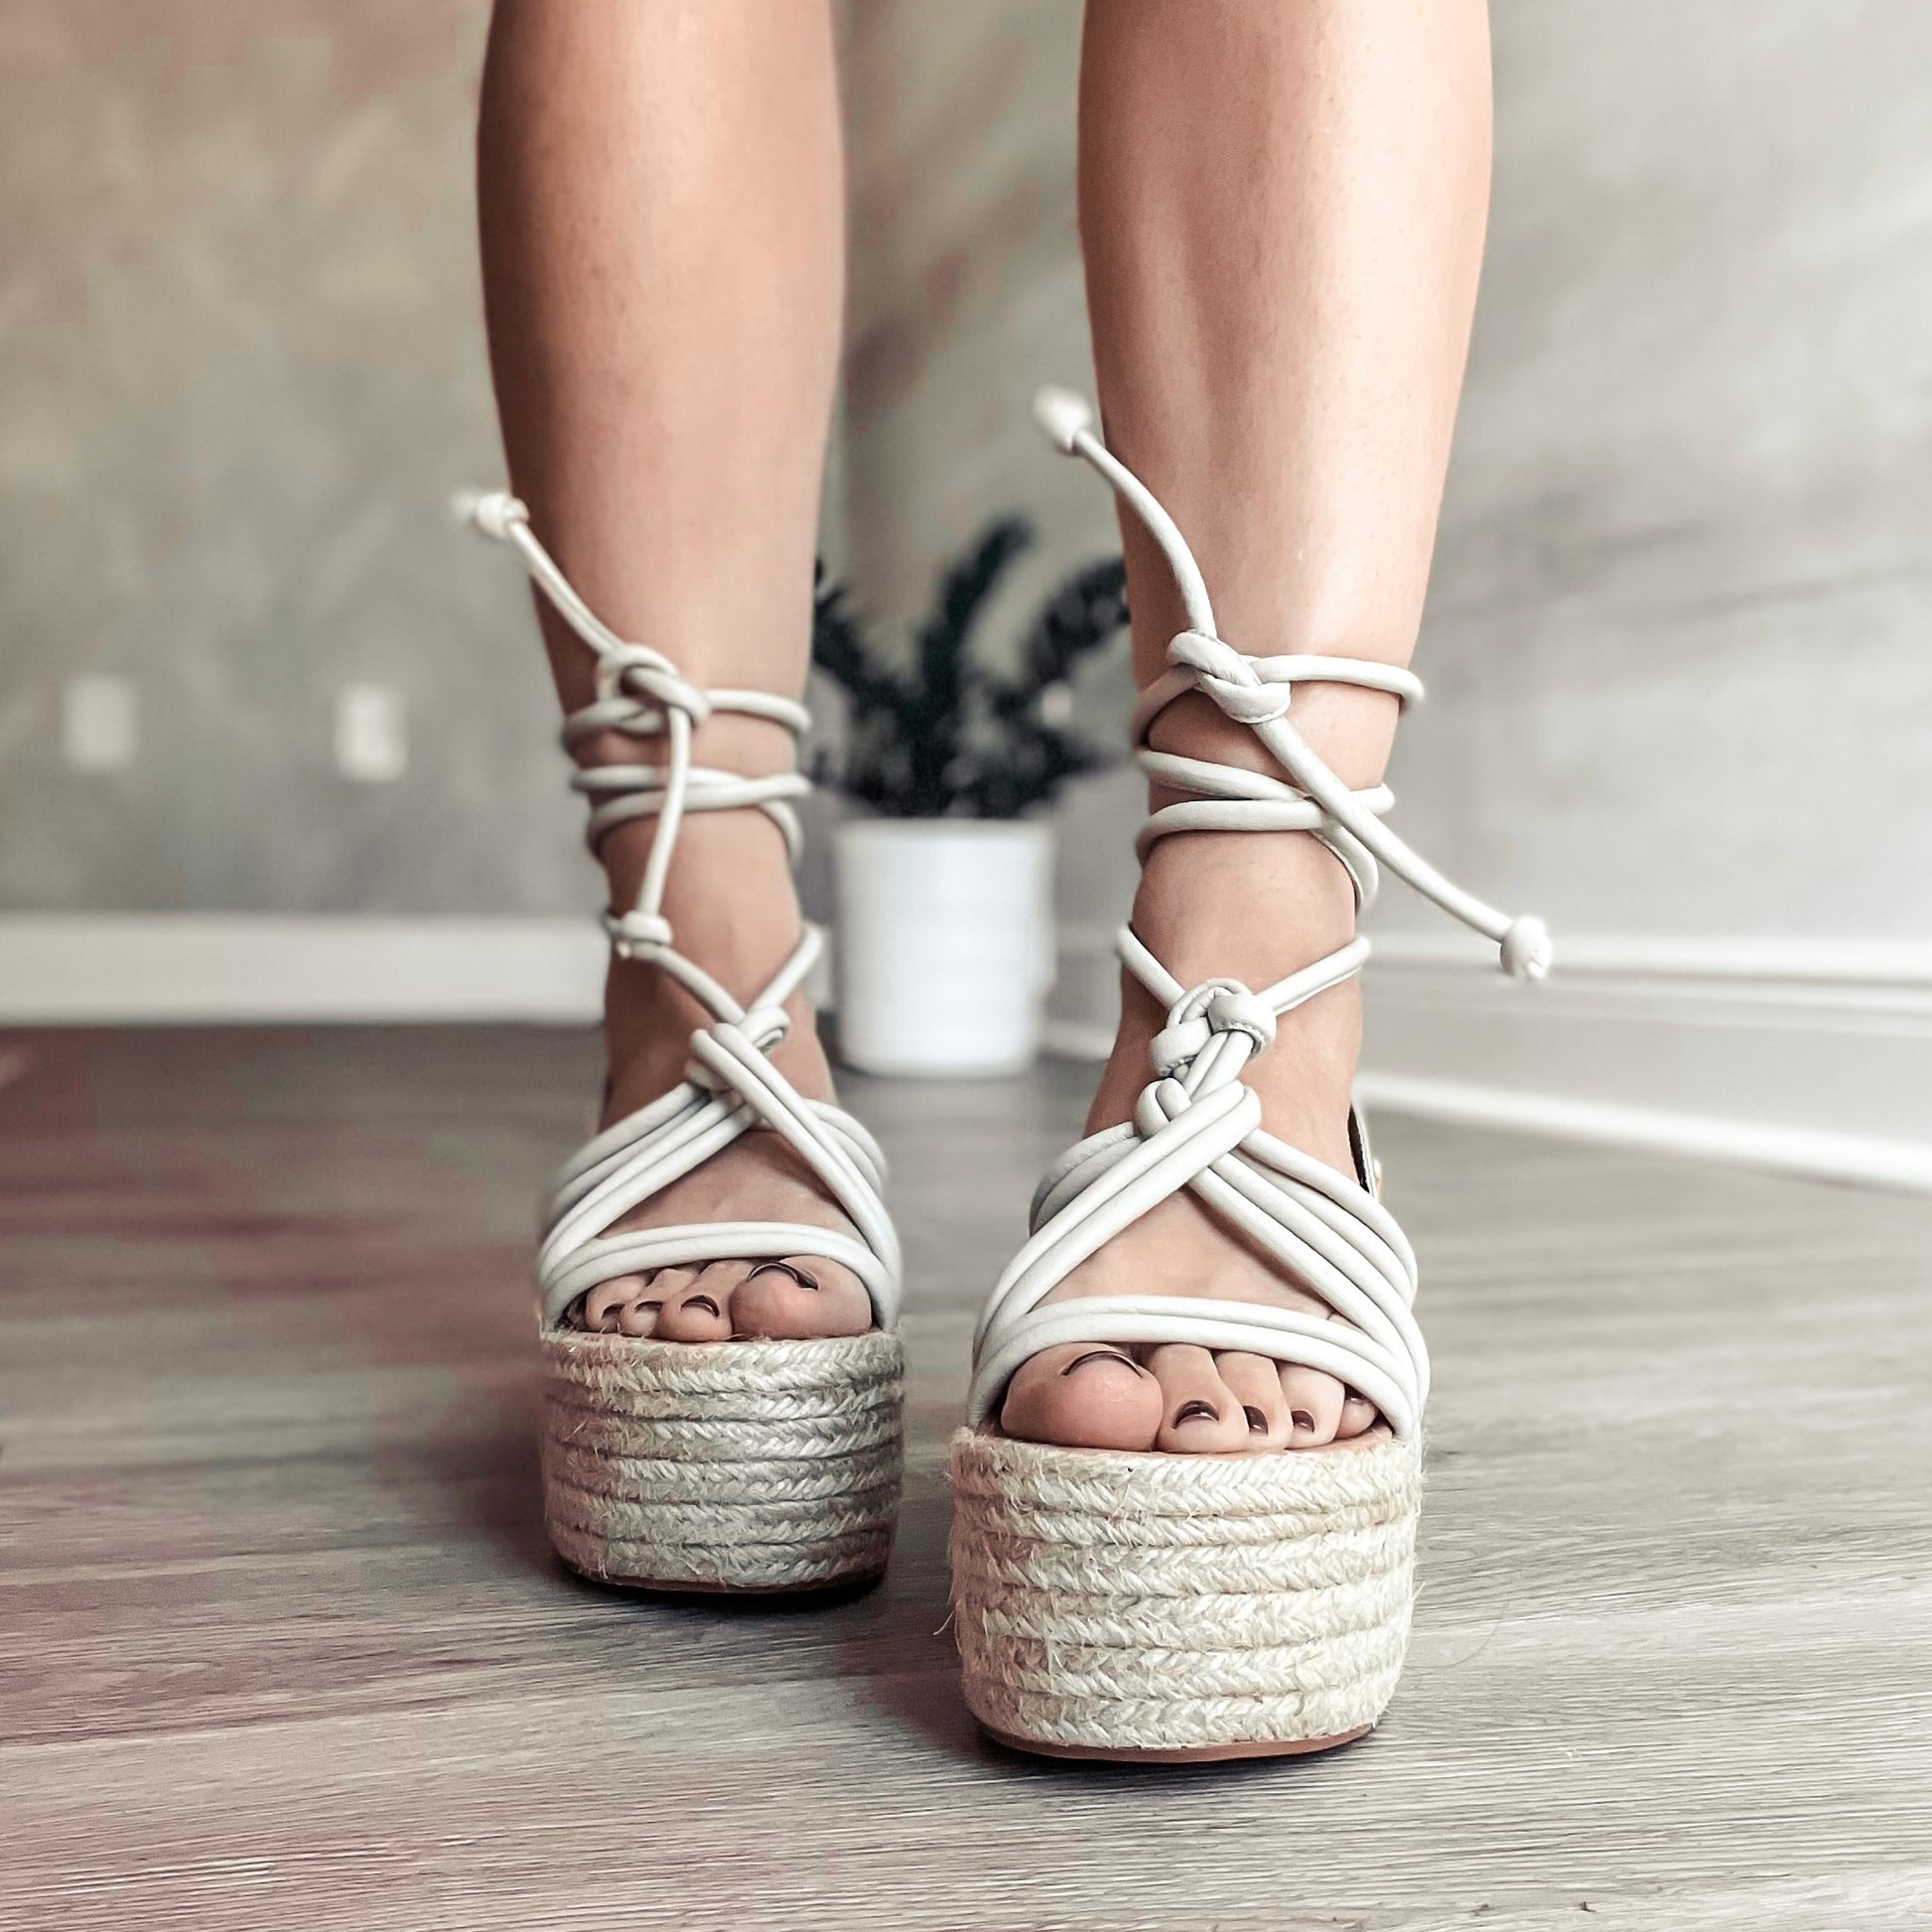 Kassy Marshmallow by Nataly Mendez Its base is lined with natural jute Green genuine leather upper Adjustable straps Genuine Leather Handmade 3-inch heel height 2.5 inch platform